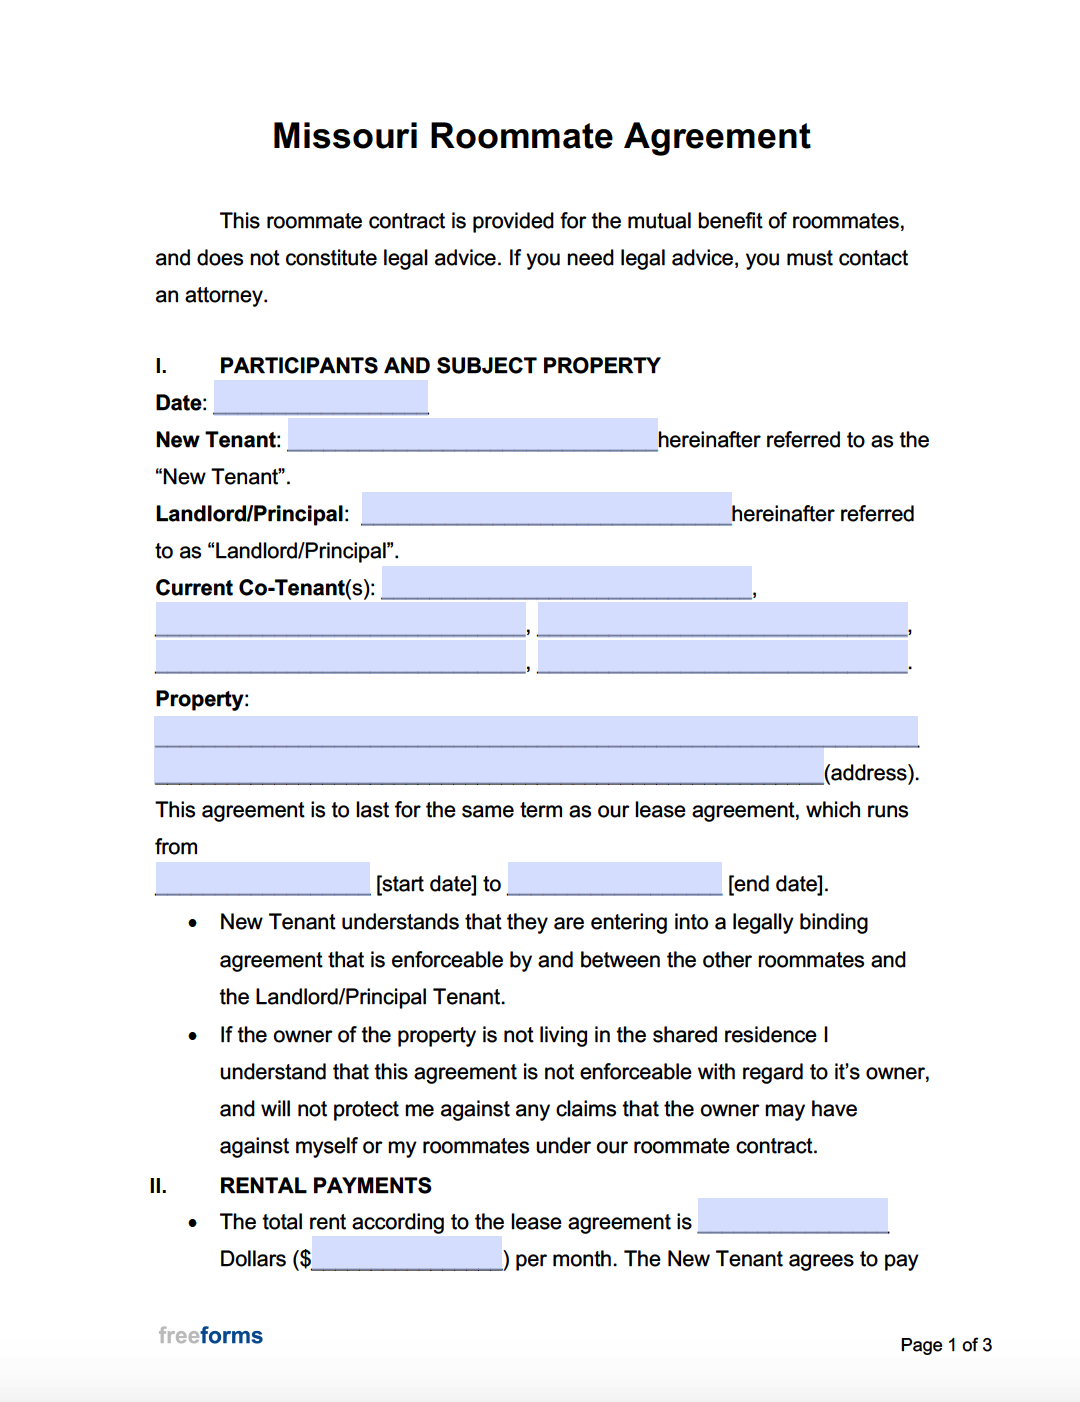 Free Missouri Roommate Agreement Template  PDF  WORD Pertaining To free roommate lease agreement template